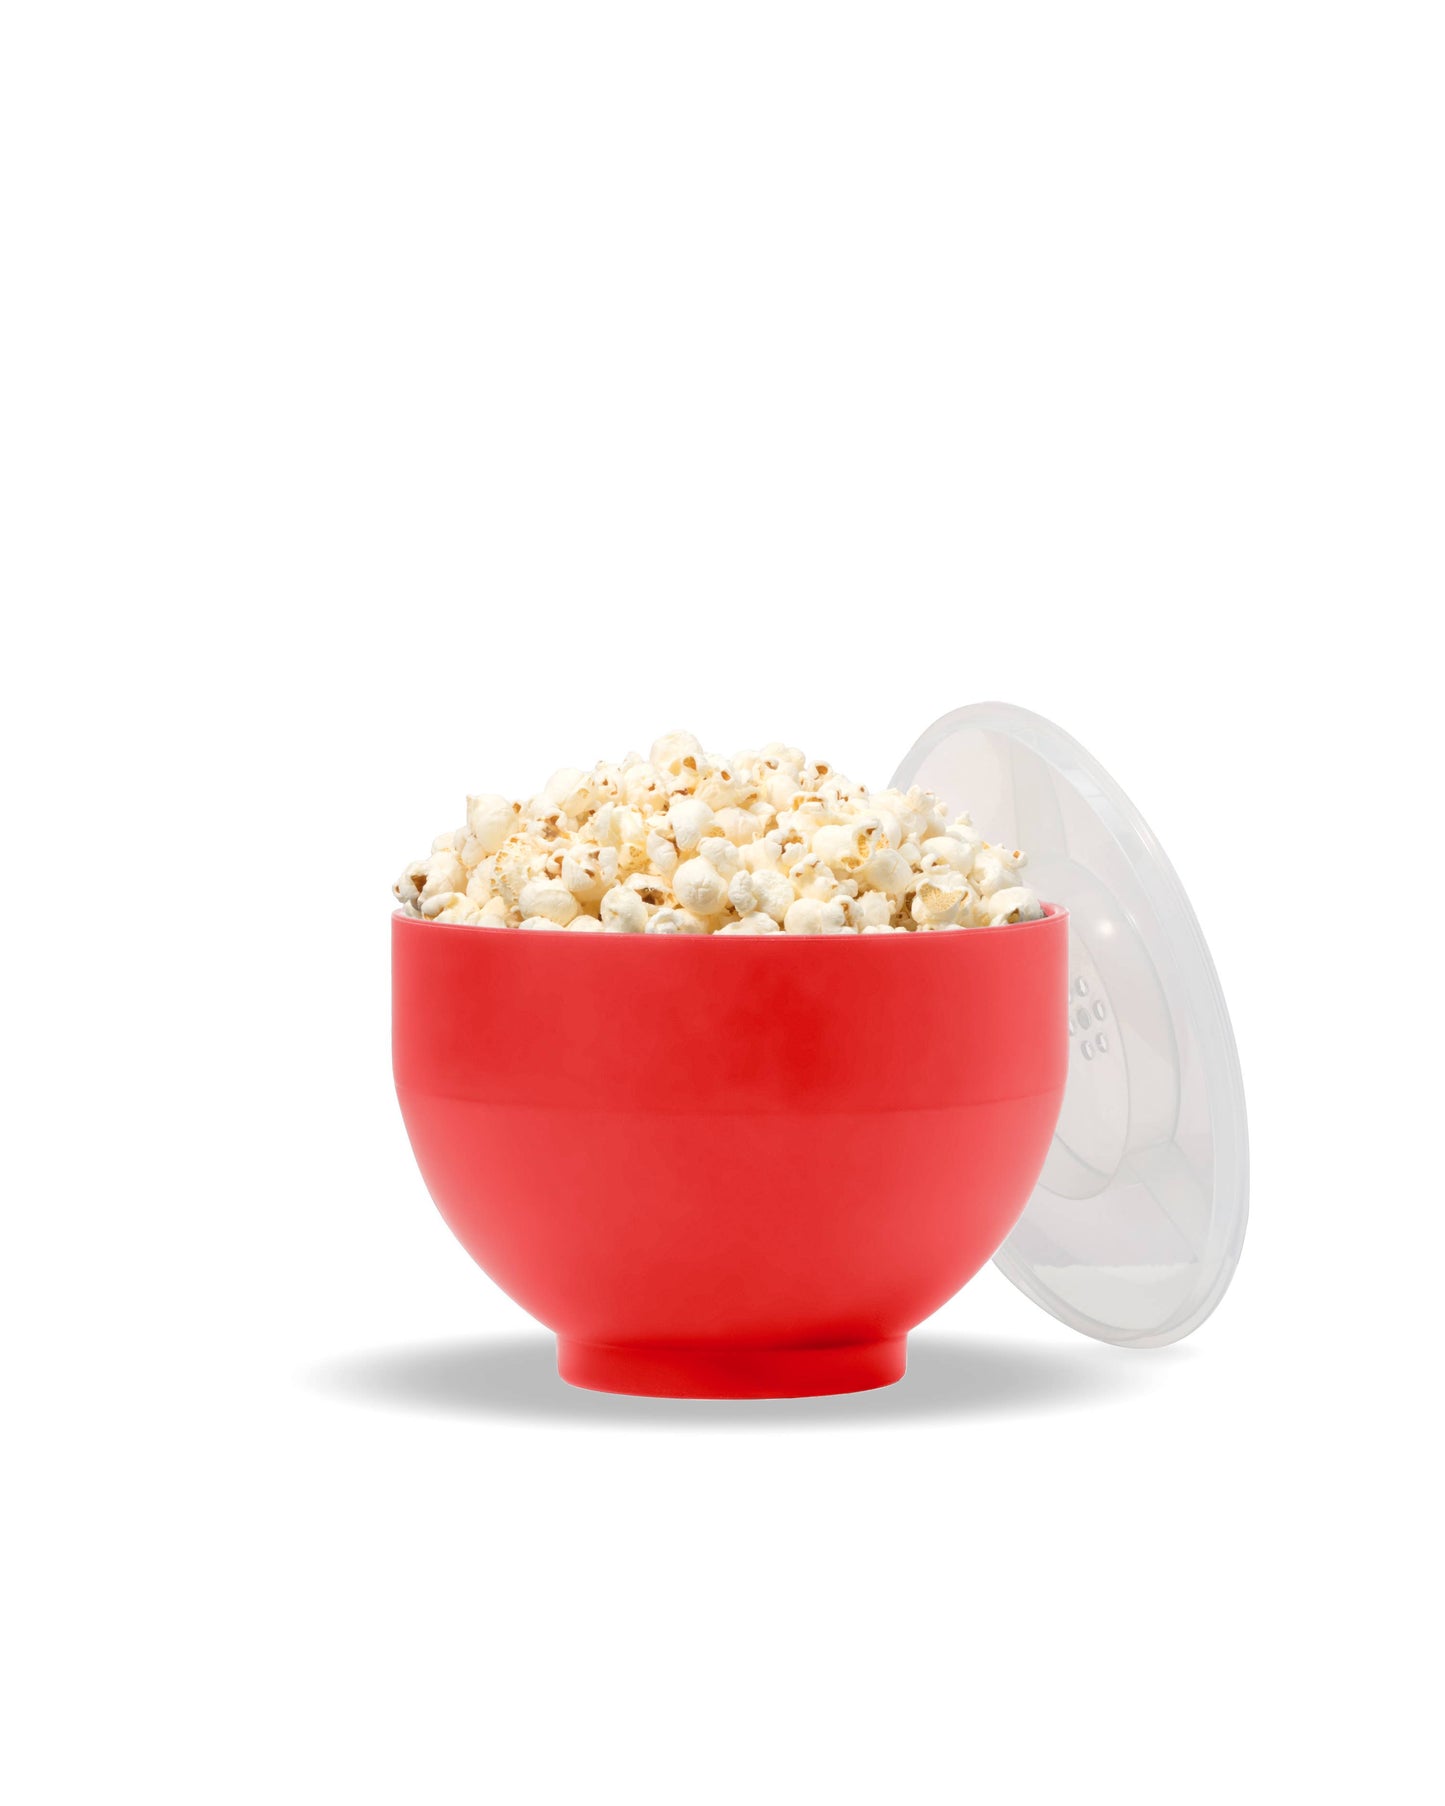 W&P - Popcorn Popper Silicone Reusable Maker - Standard Size: Charcoal